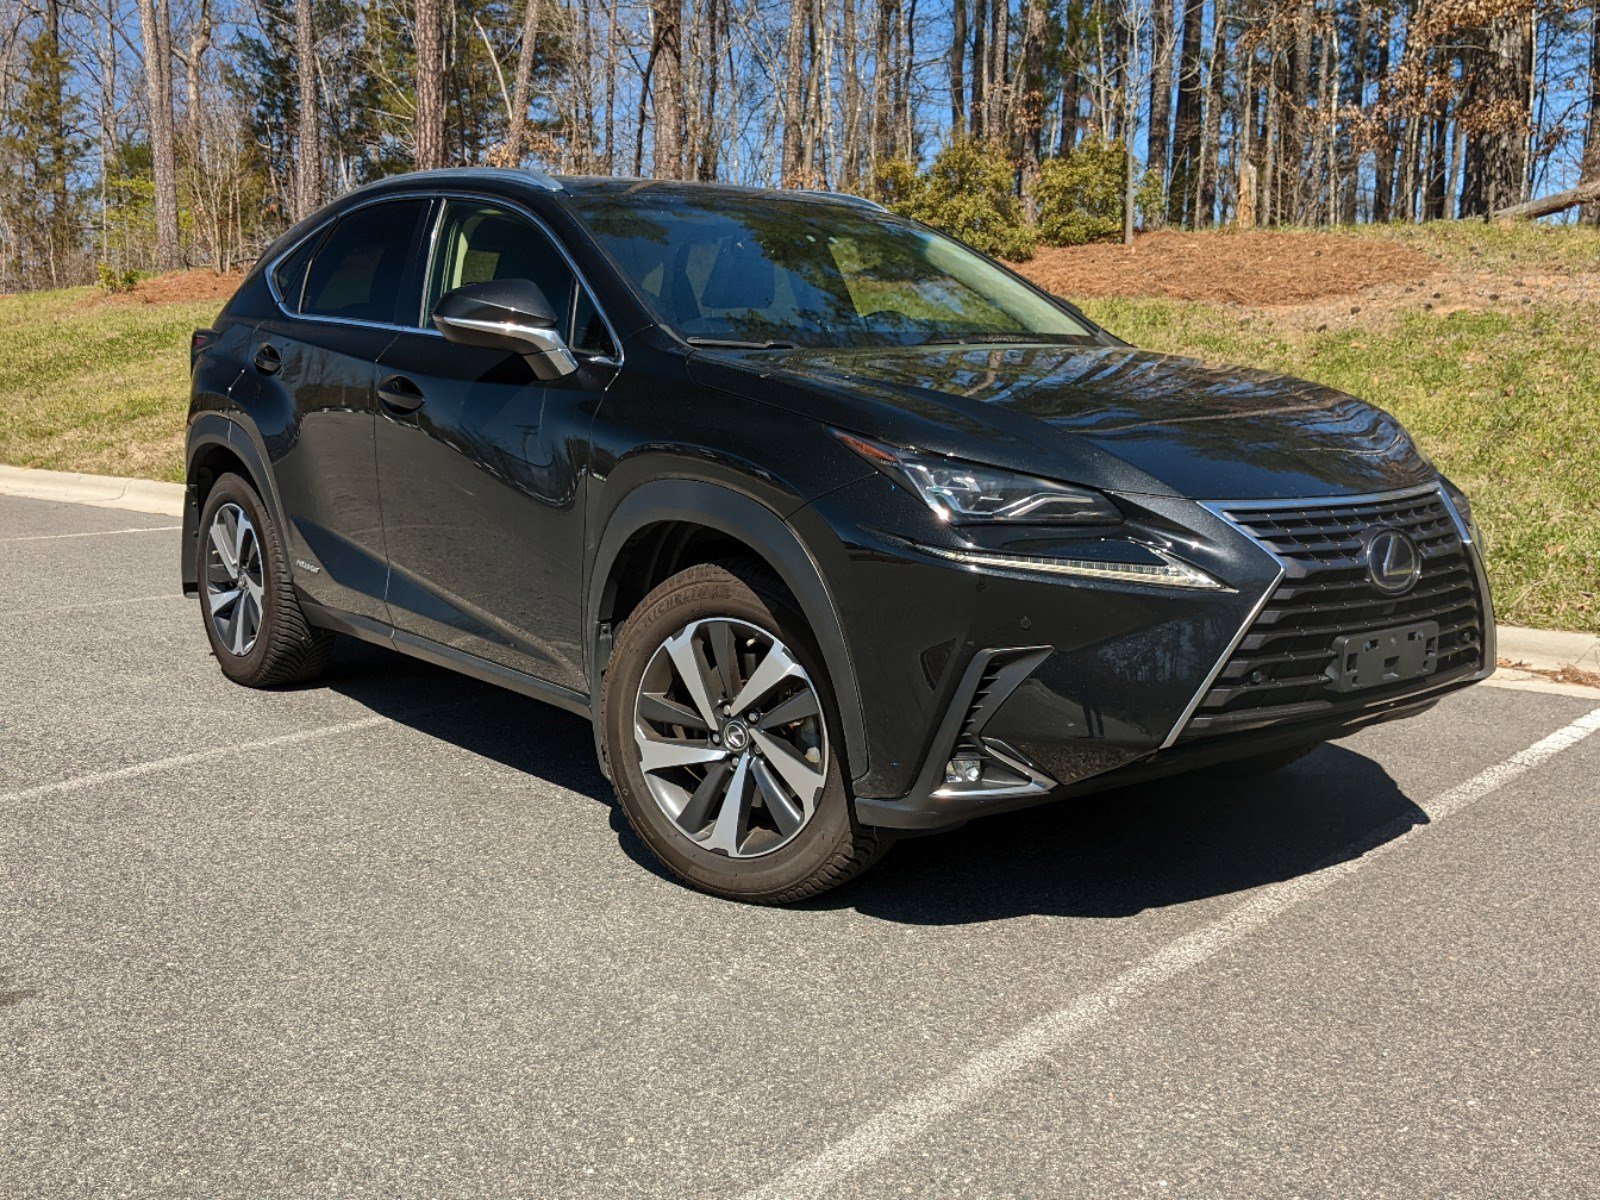 Pre-Owned 2018 Lexus NX NX 300h SUV in Cary #QB0816A | Hendrick Dodge Cary